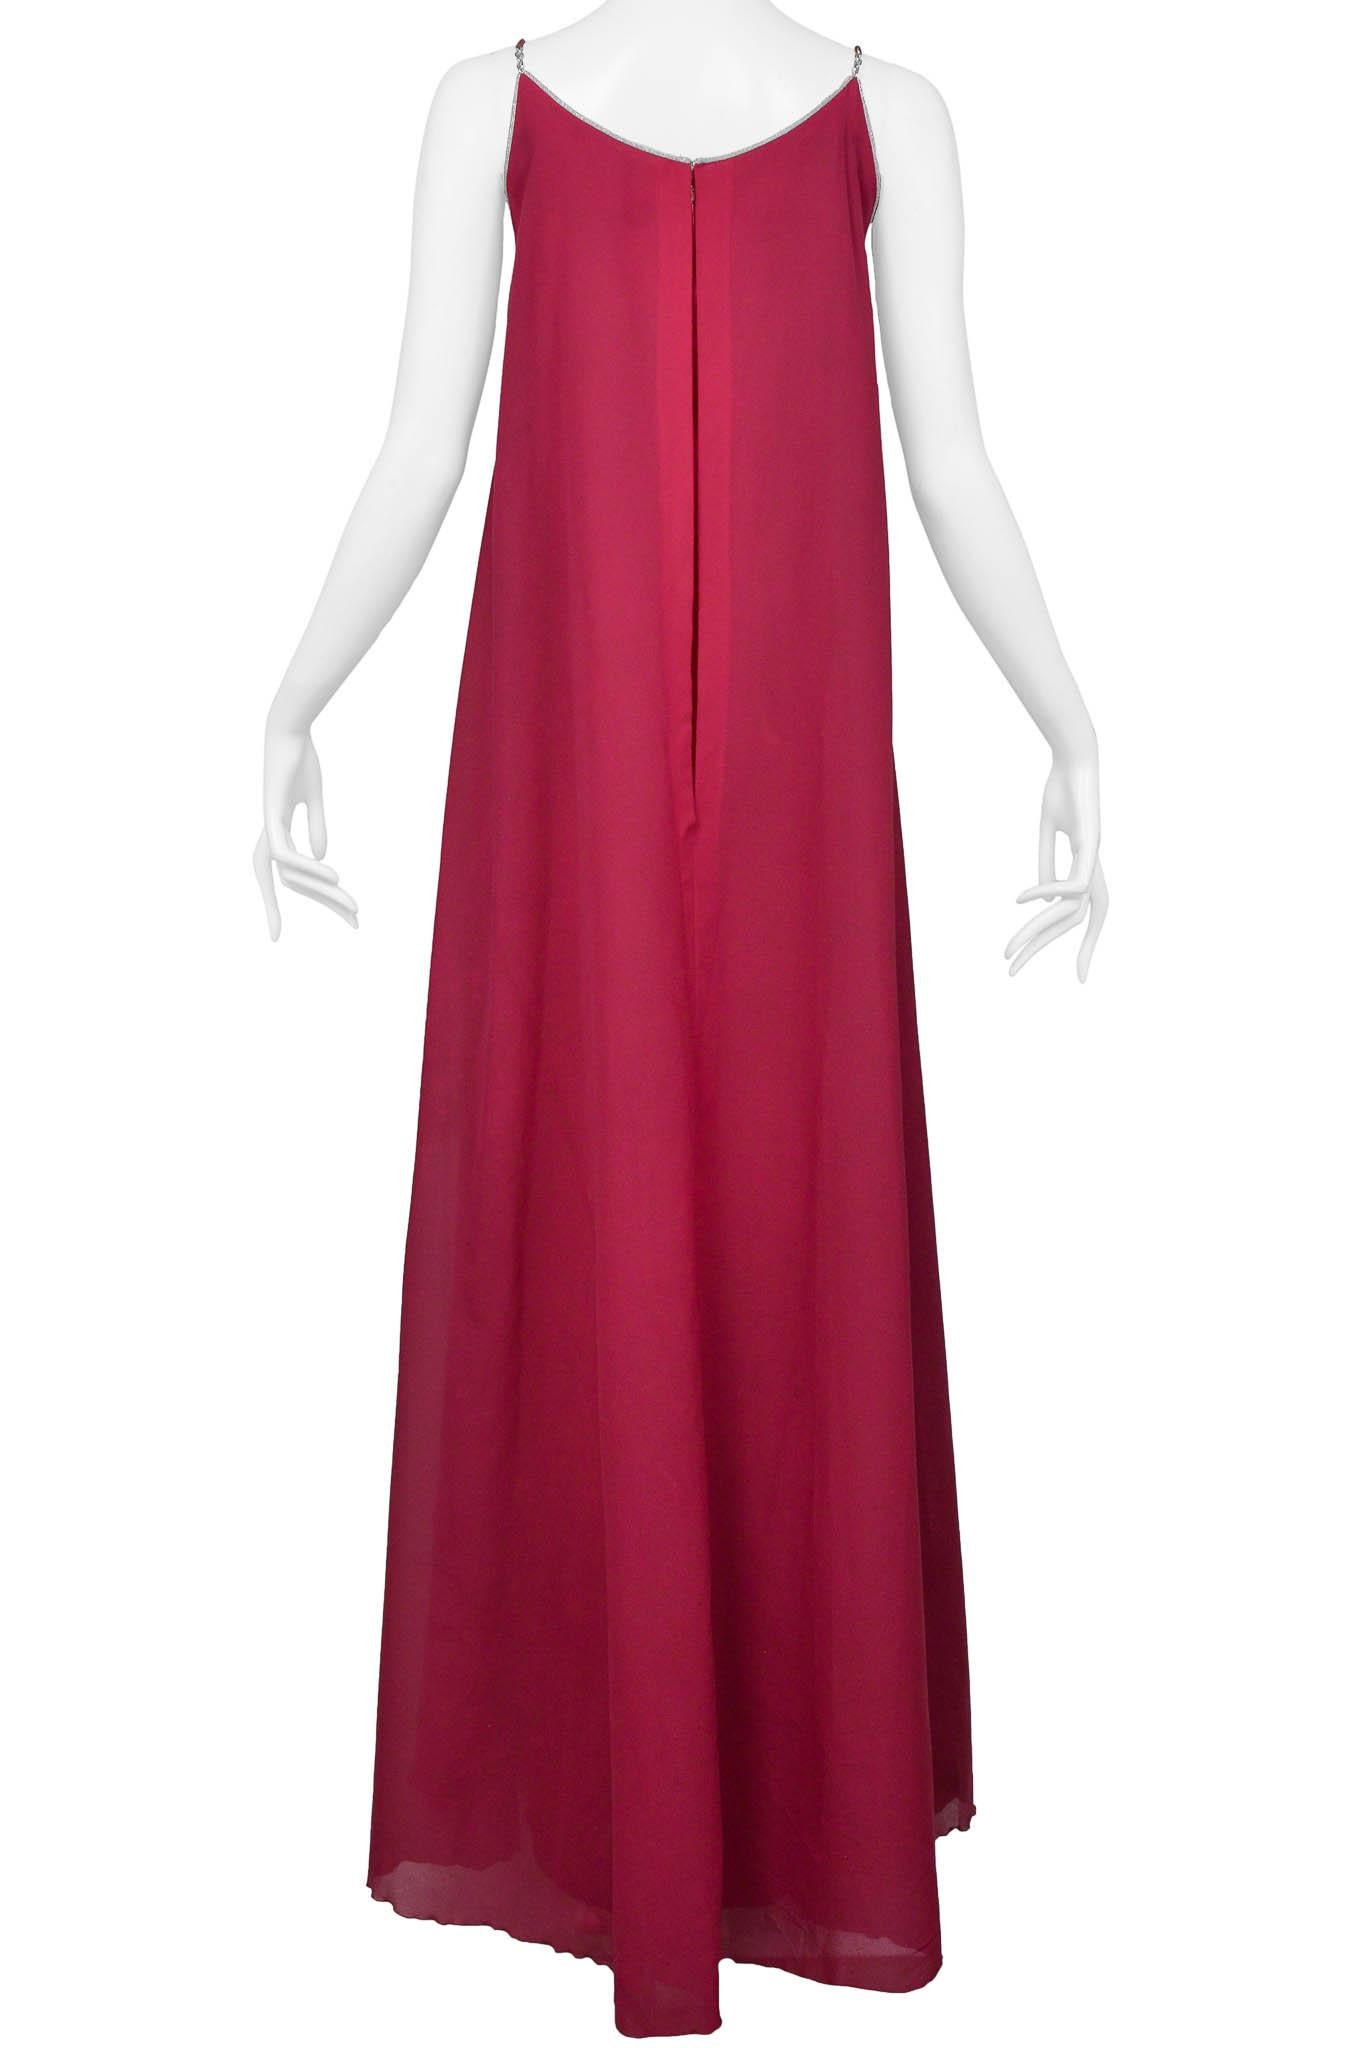 Jacques Cassia Pink Gown With Metal Details For Sale 2